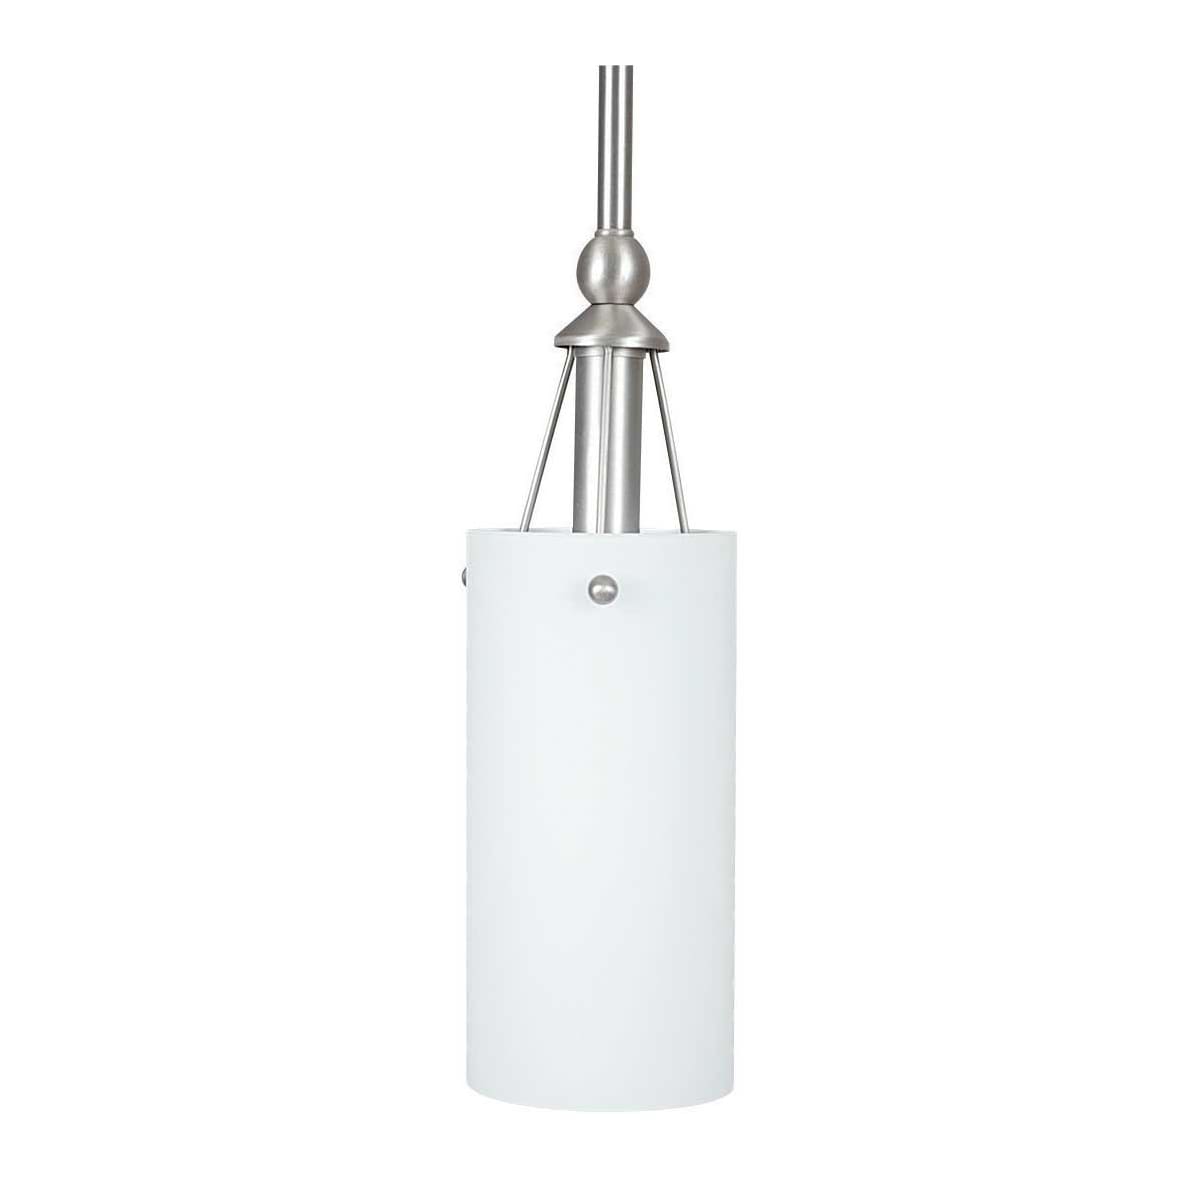 Sunset Lighting F5414-53 Pendant with Frosted Milk Glass Satin Nickel Finish